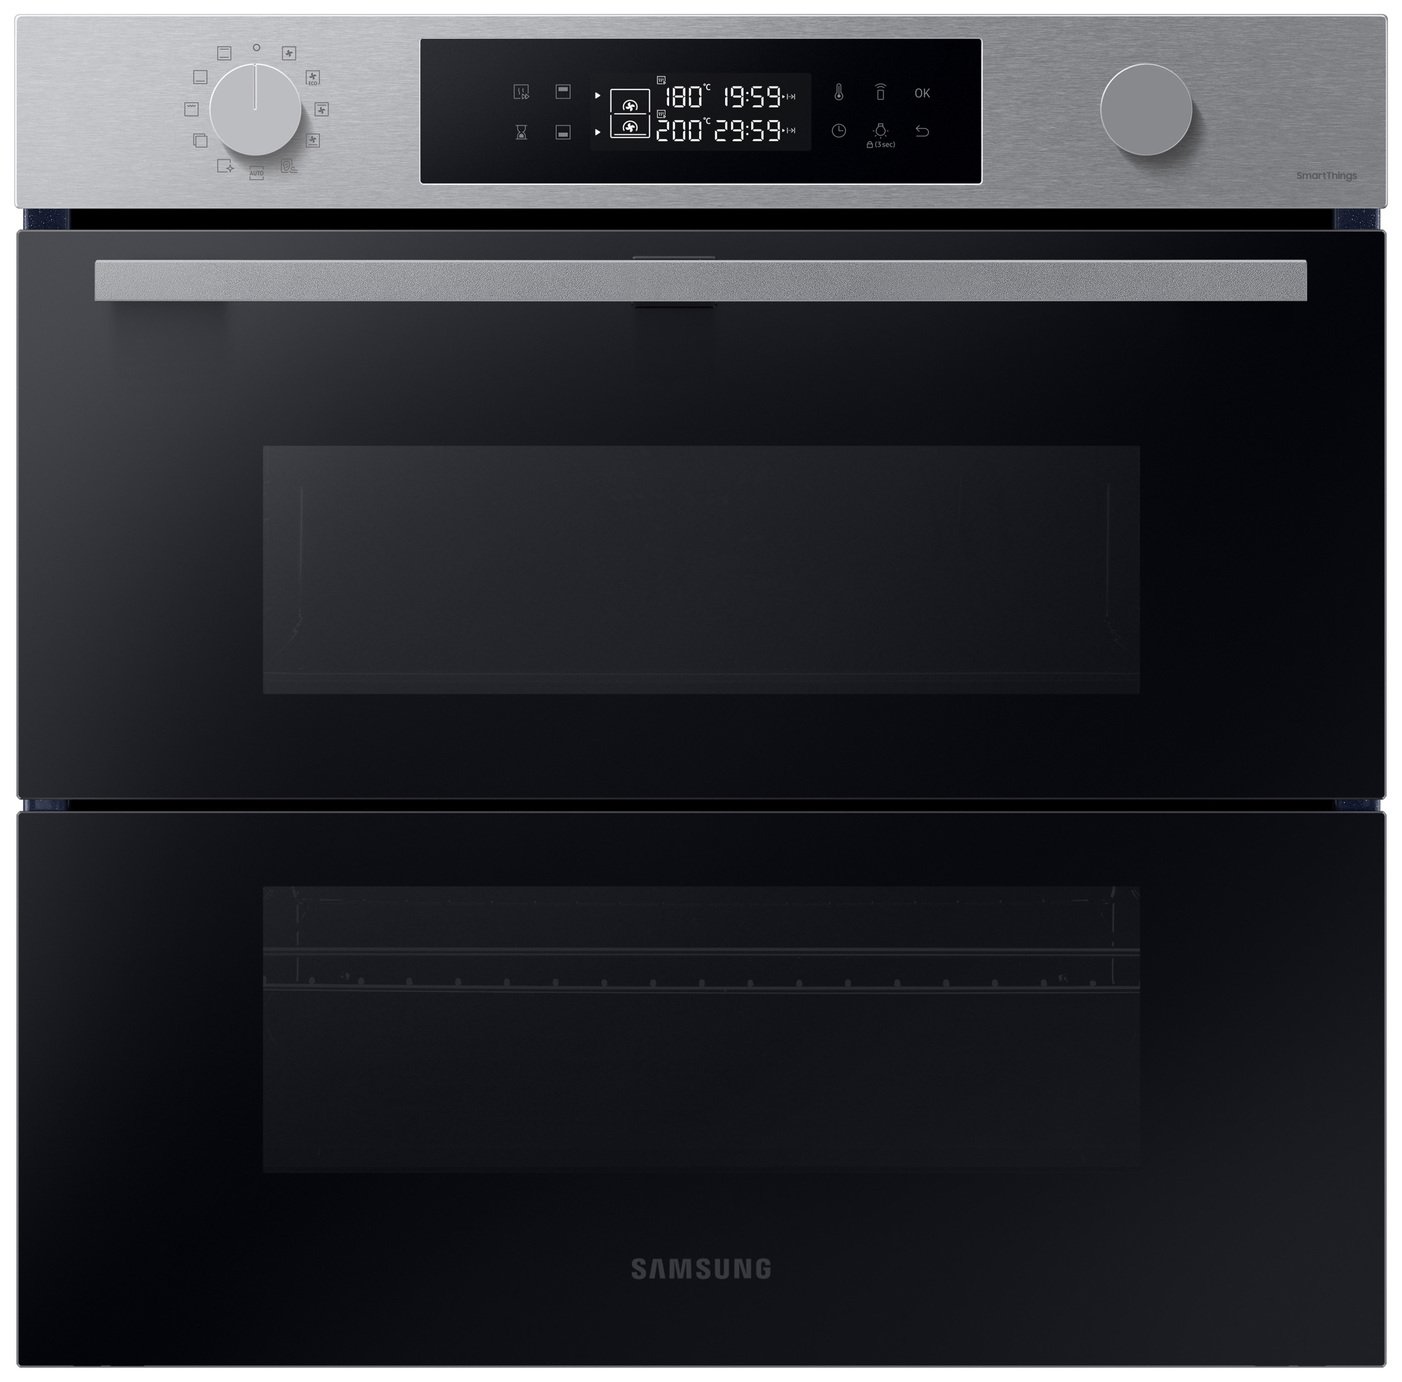 Samsung NV7B45205AS Built In Single Electric Oven – Black